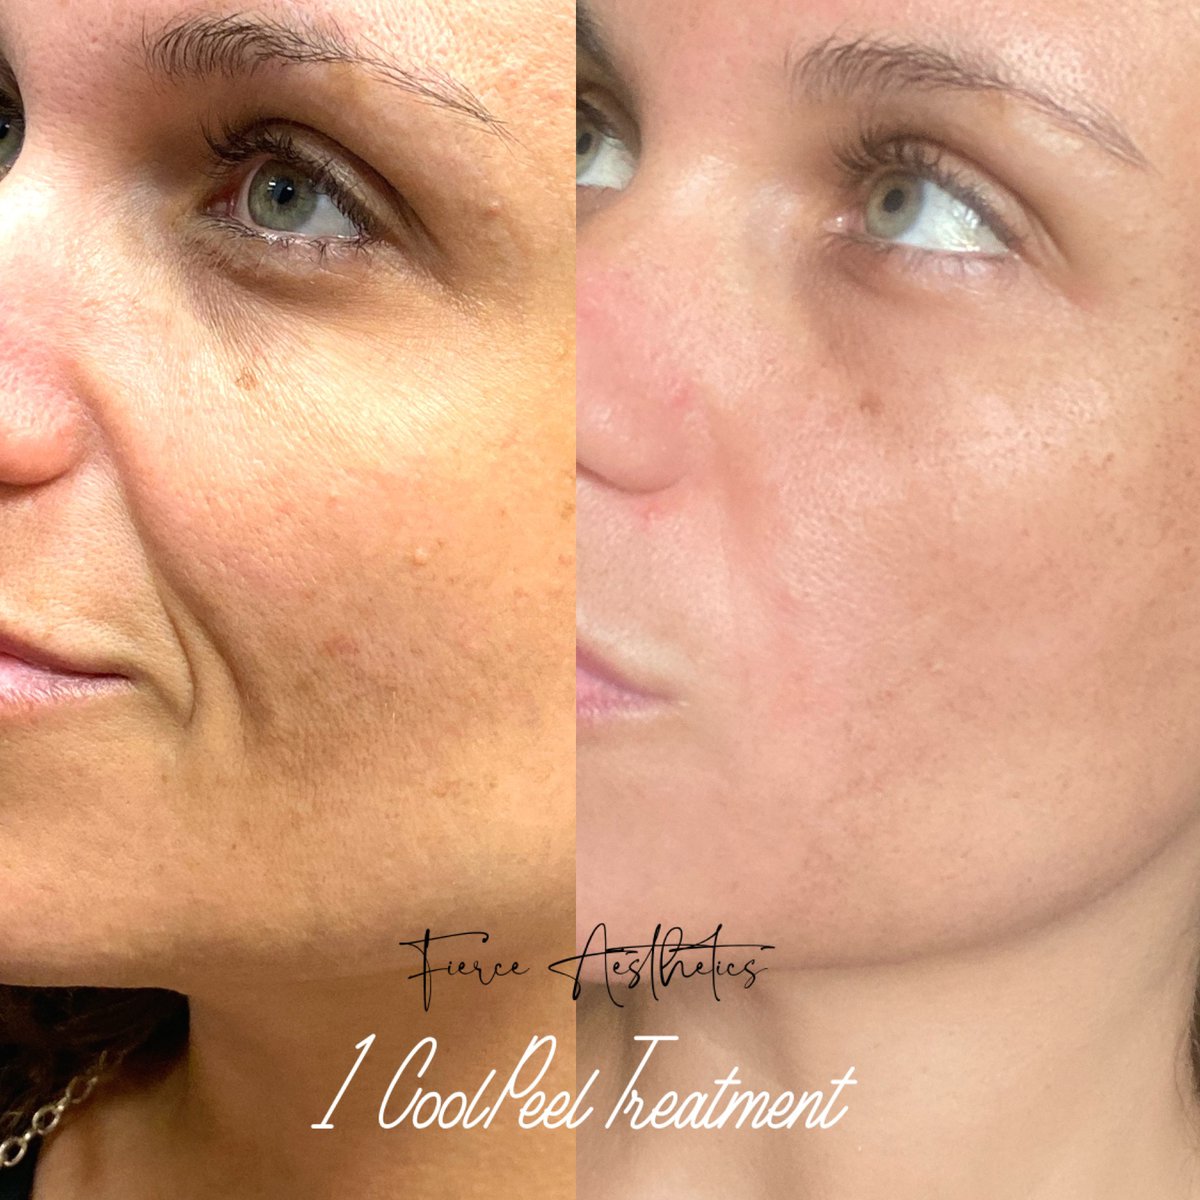 Before & After services | Fierce Aesthetics Med Spa | Lima OH